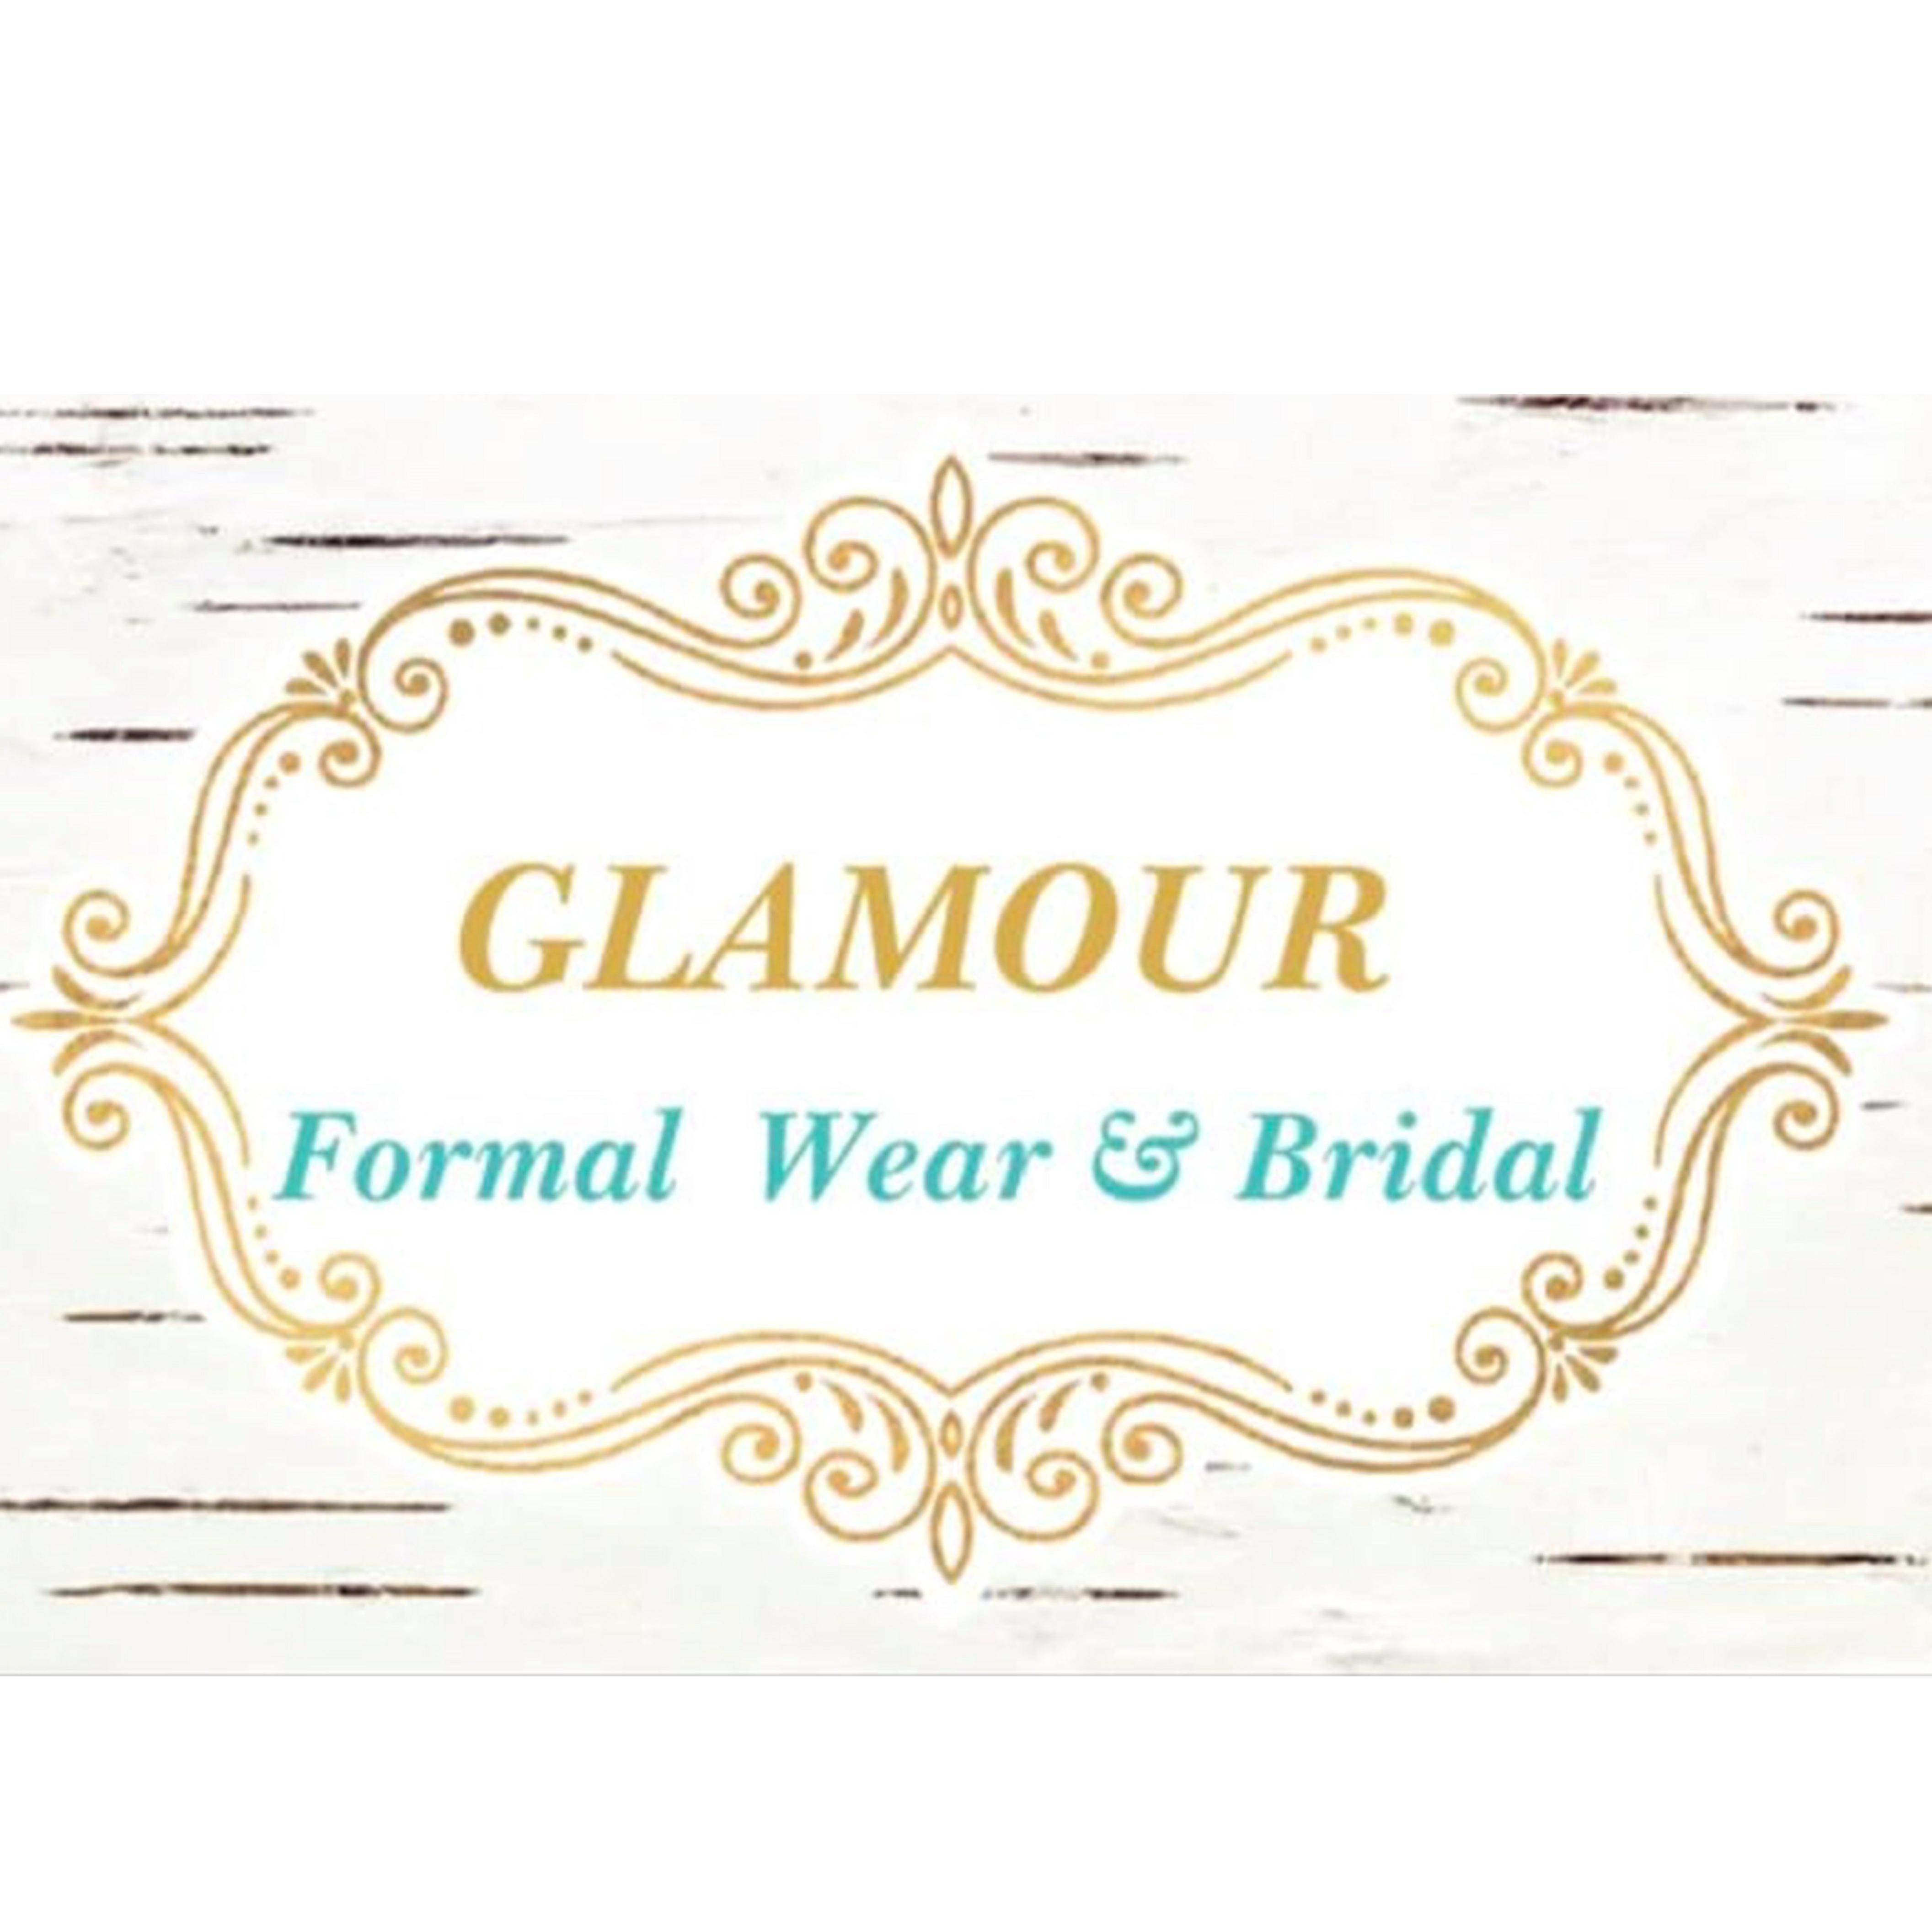 Glamour Formal Wear and Bridal Photo